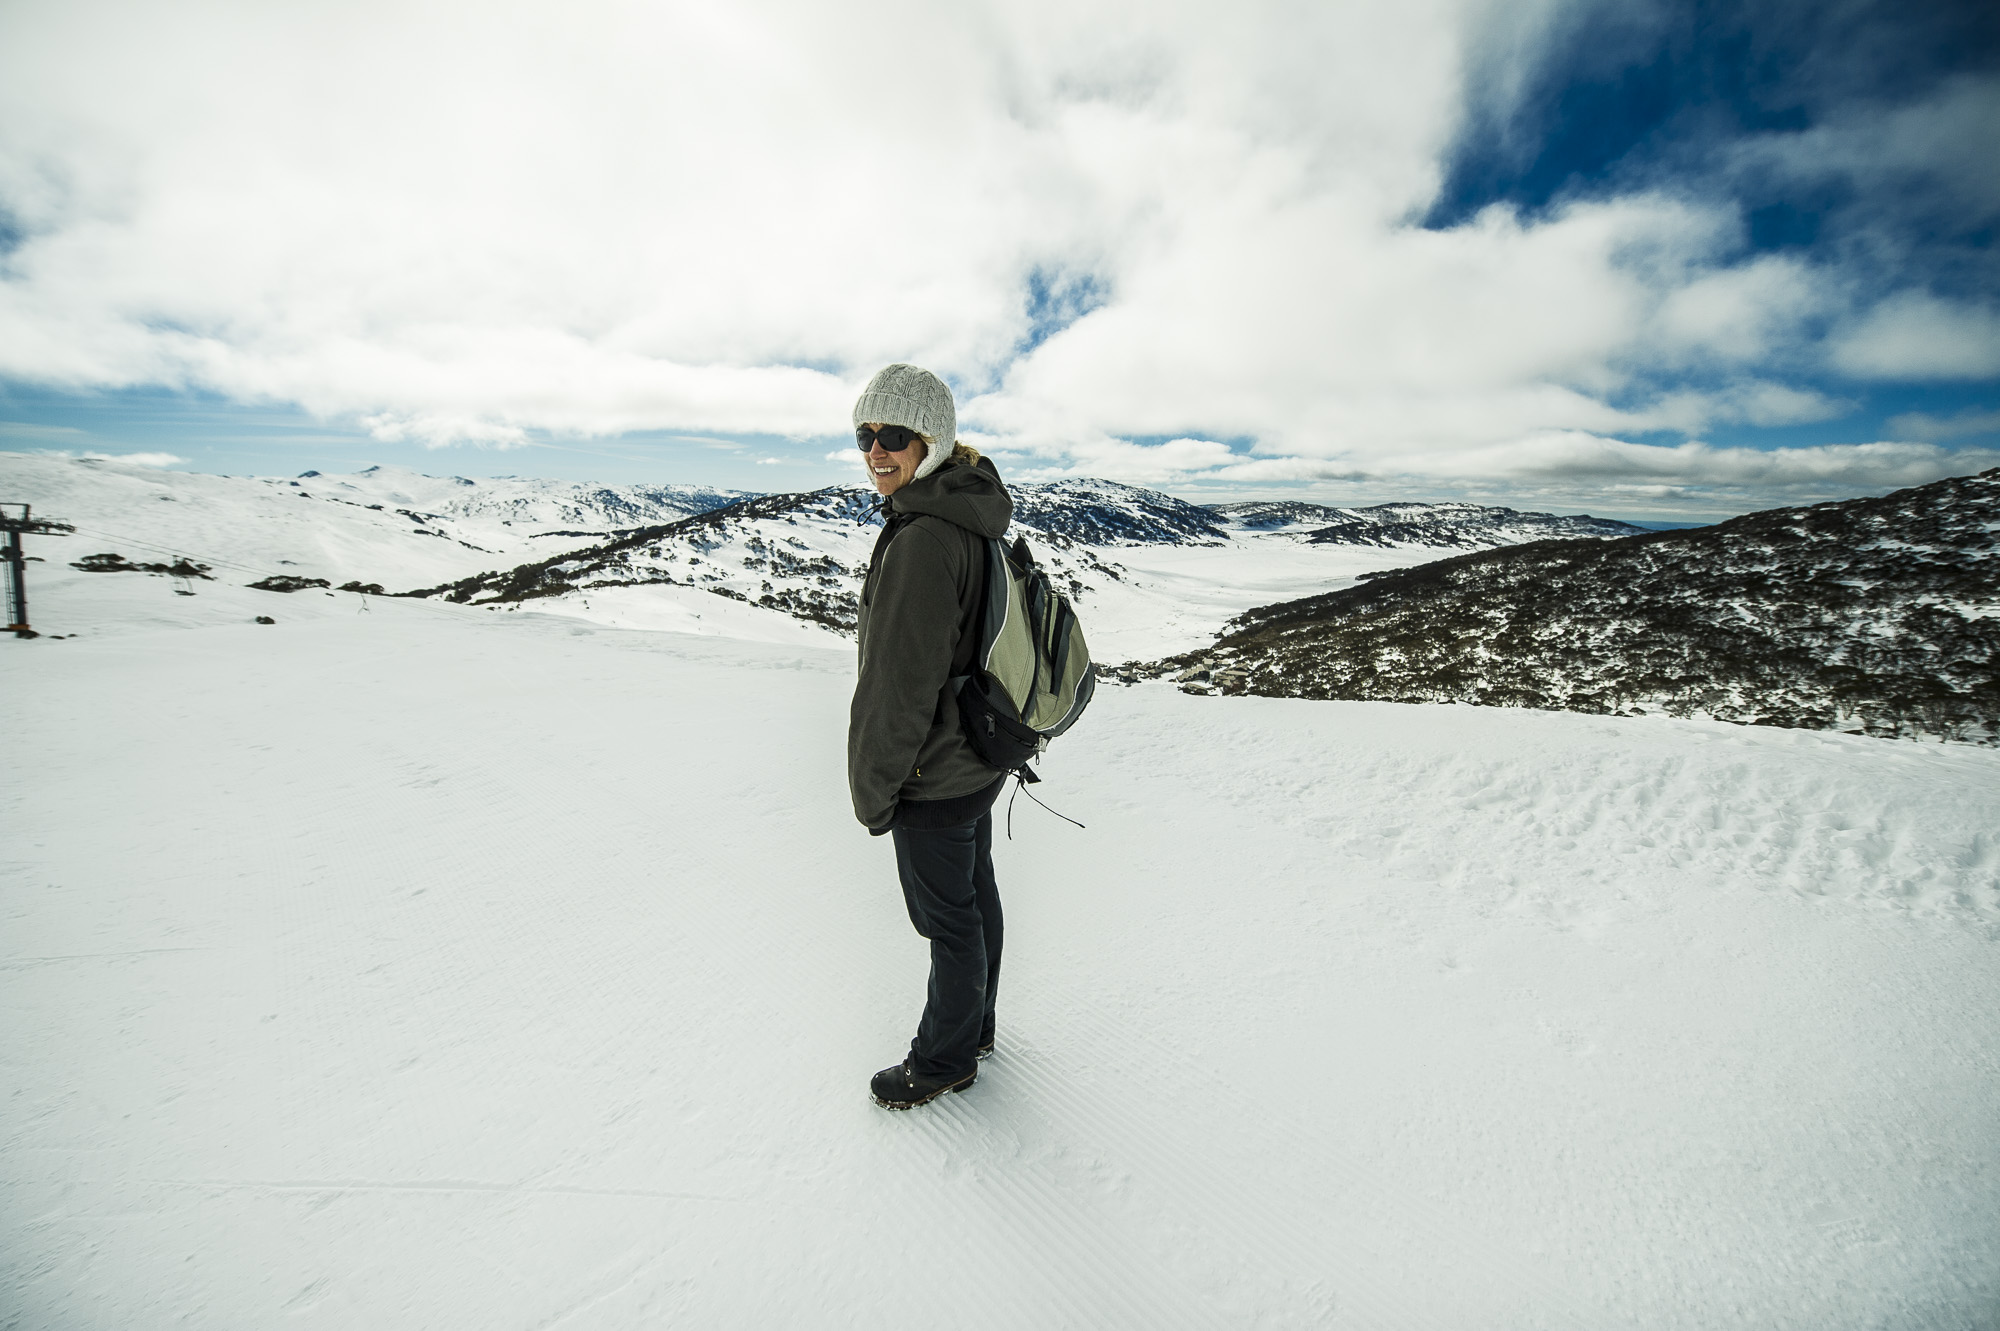 Location scouting for the Snowy Mountains Winter campaign